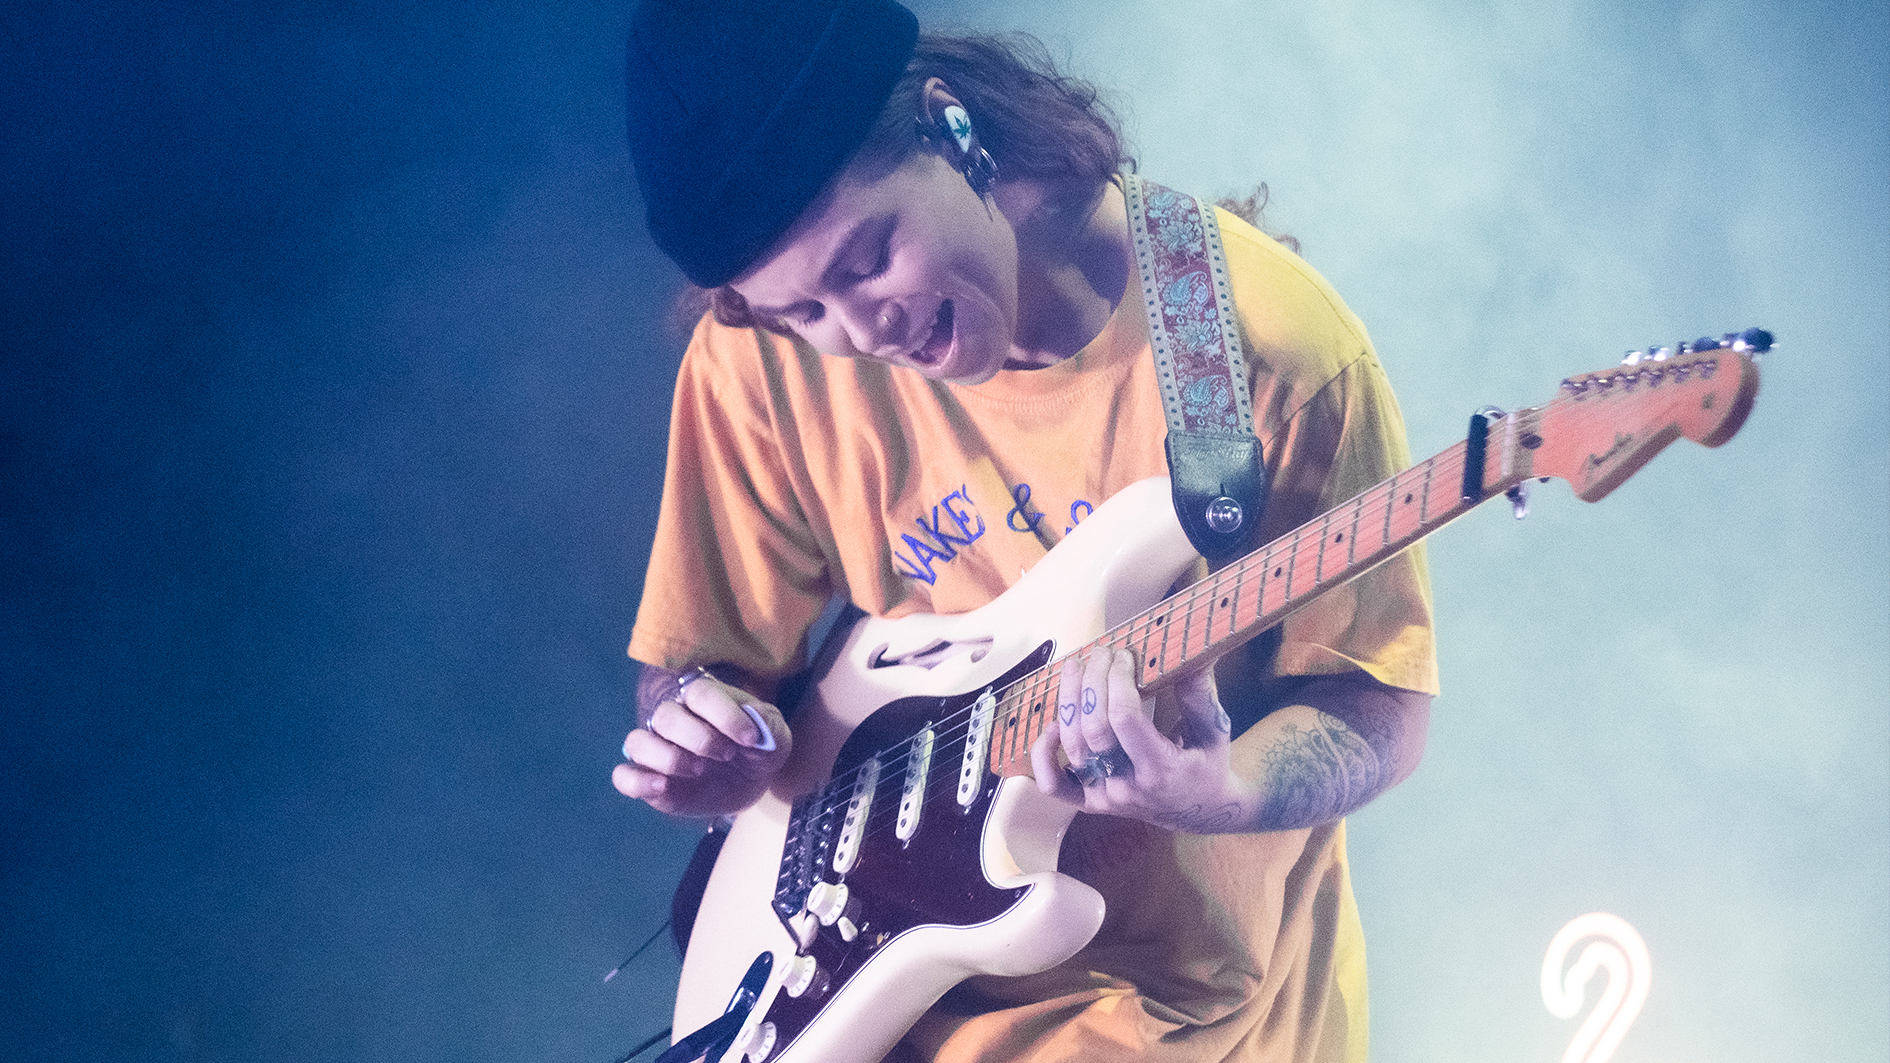 Tash Sultana Will Leave the Past Behind with 'Flow State